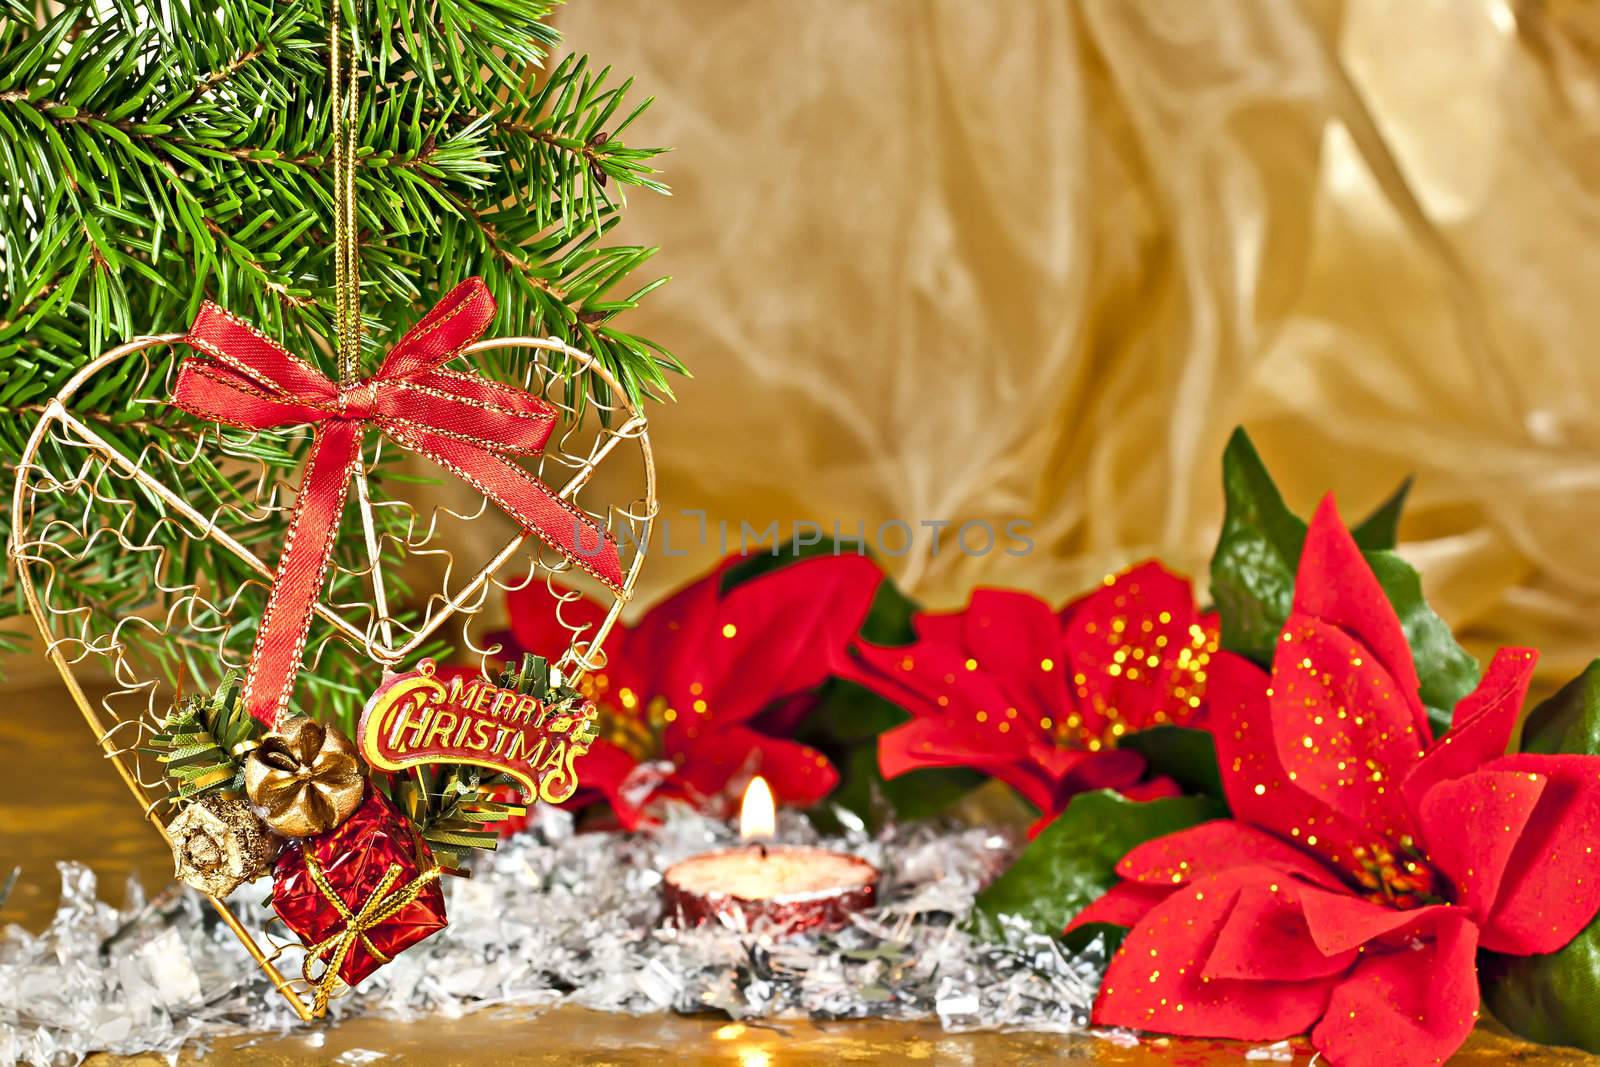 Christmas composition, fir branch with the decor, Poinsettia on gold background.

